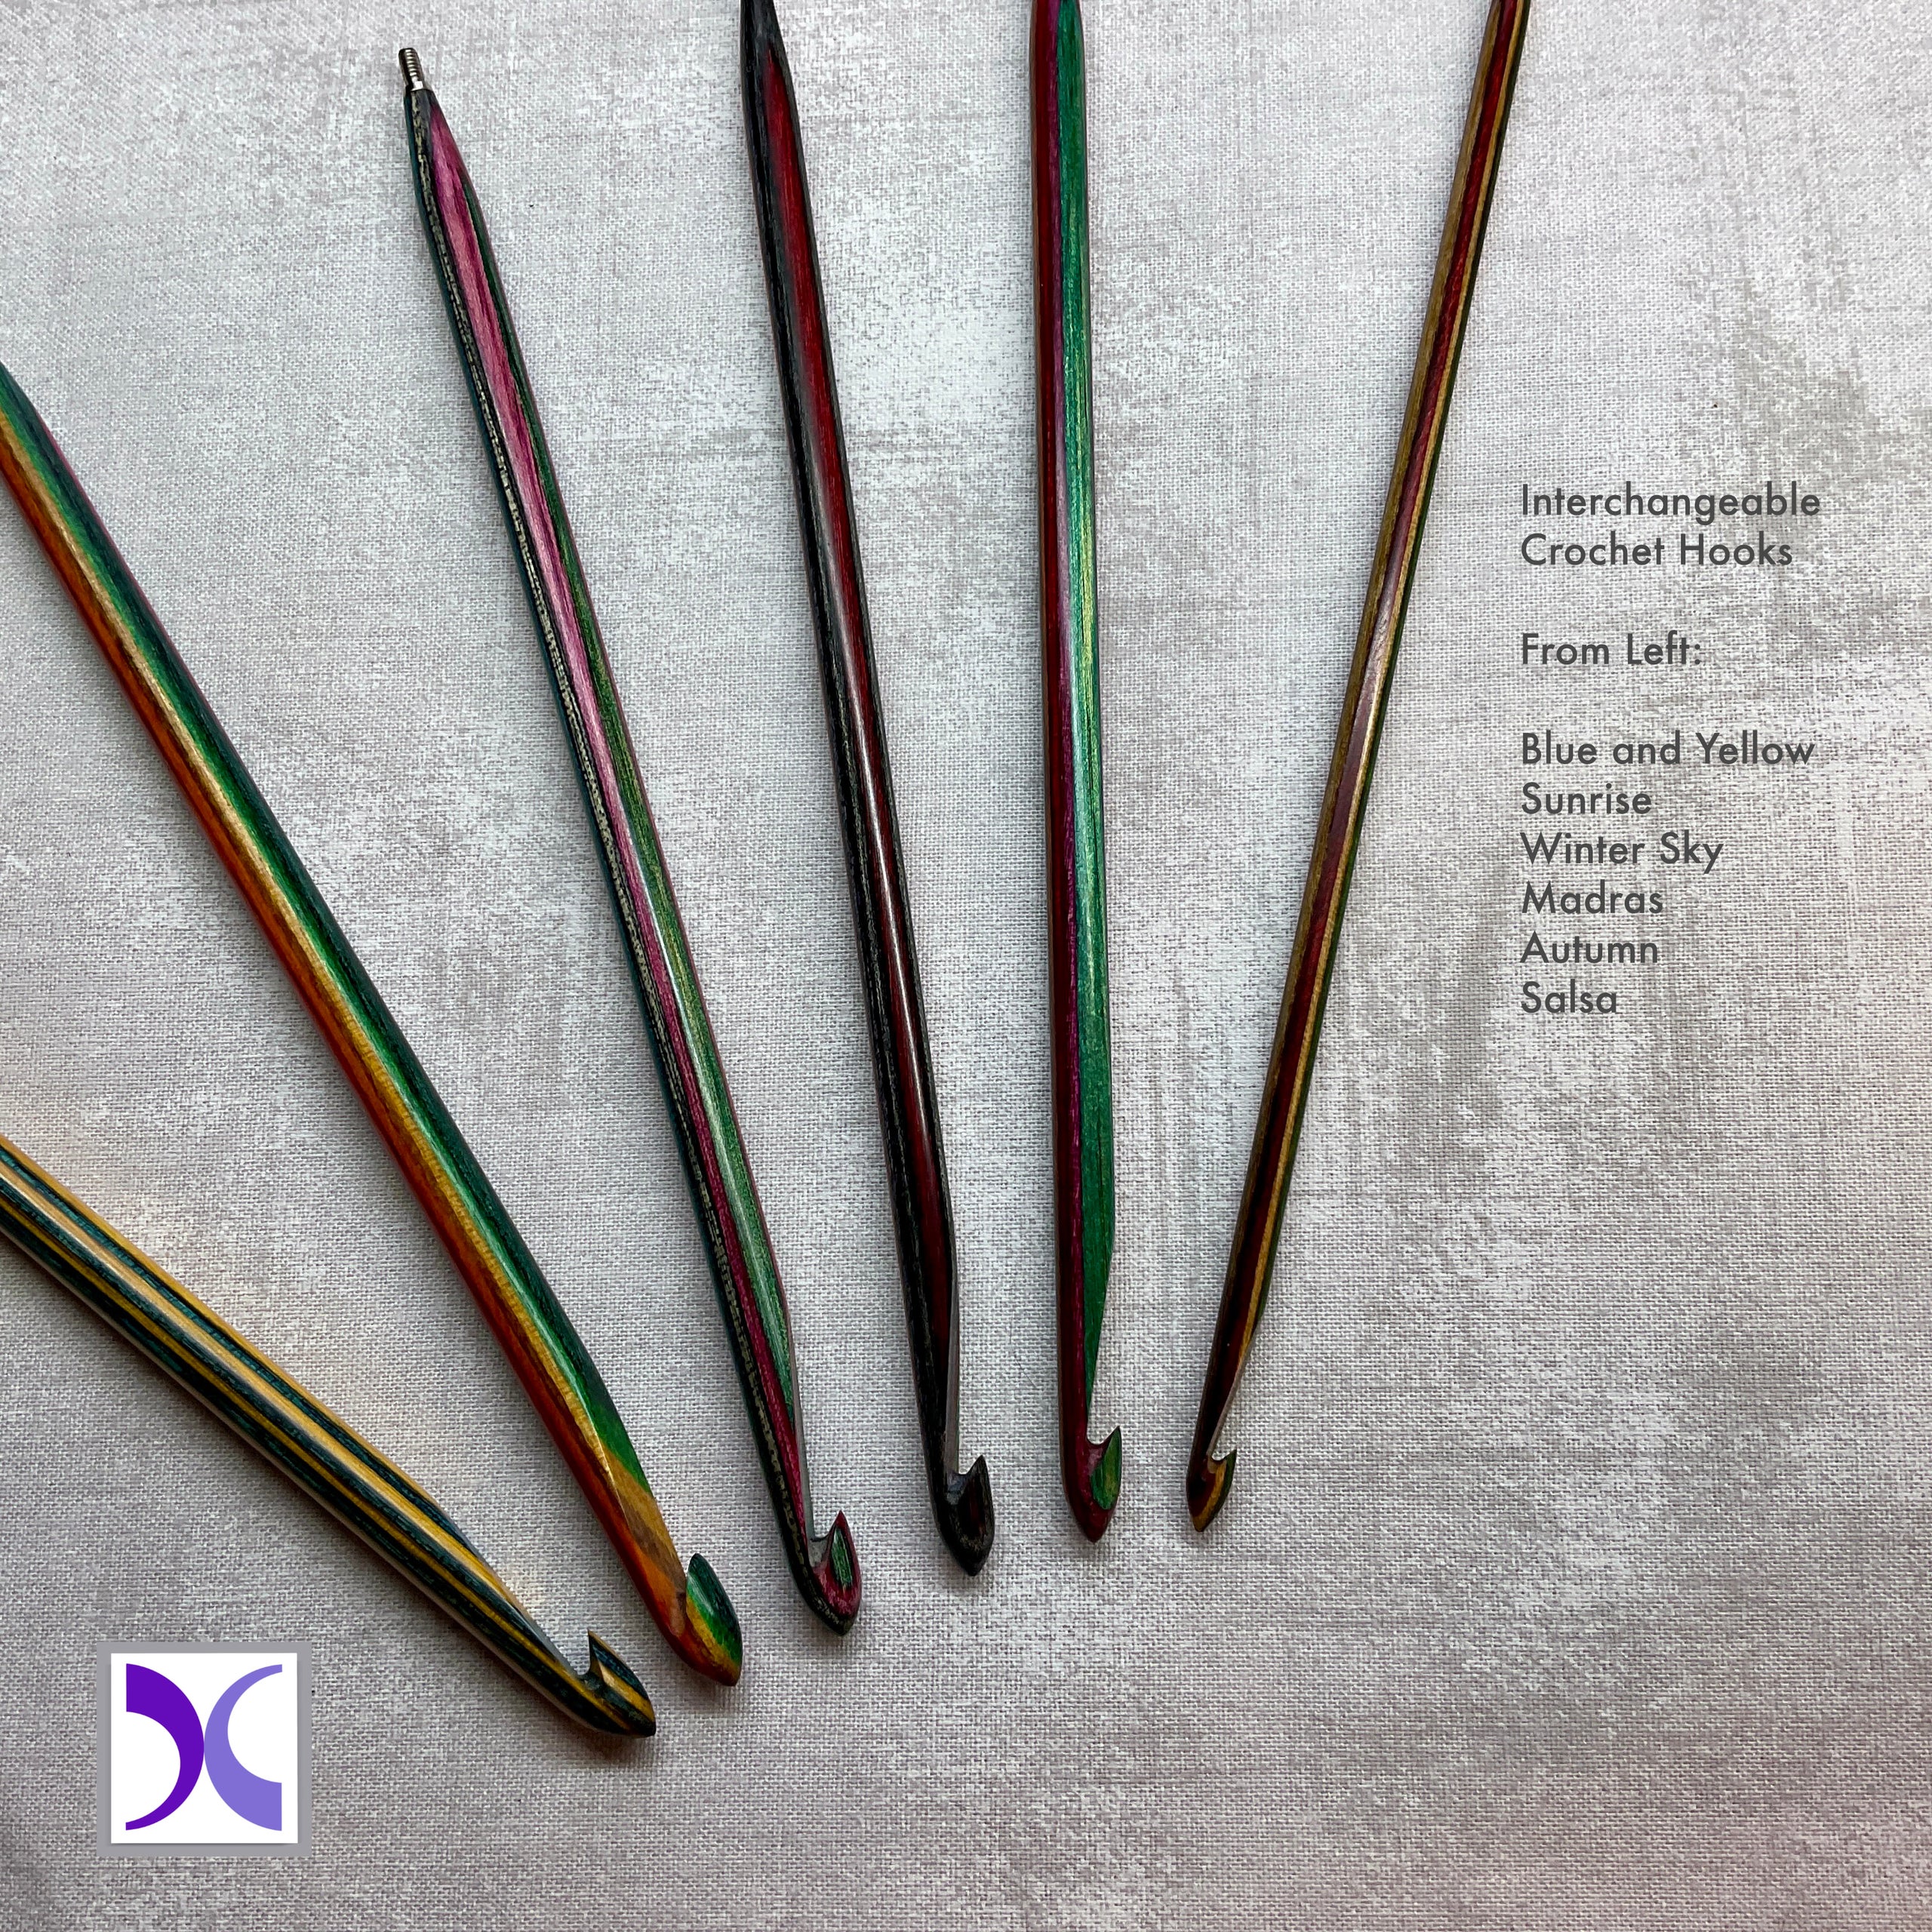 Tunisian Crochet Hooks with Detachable Cable